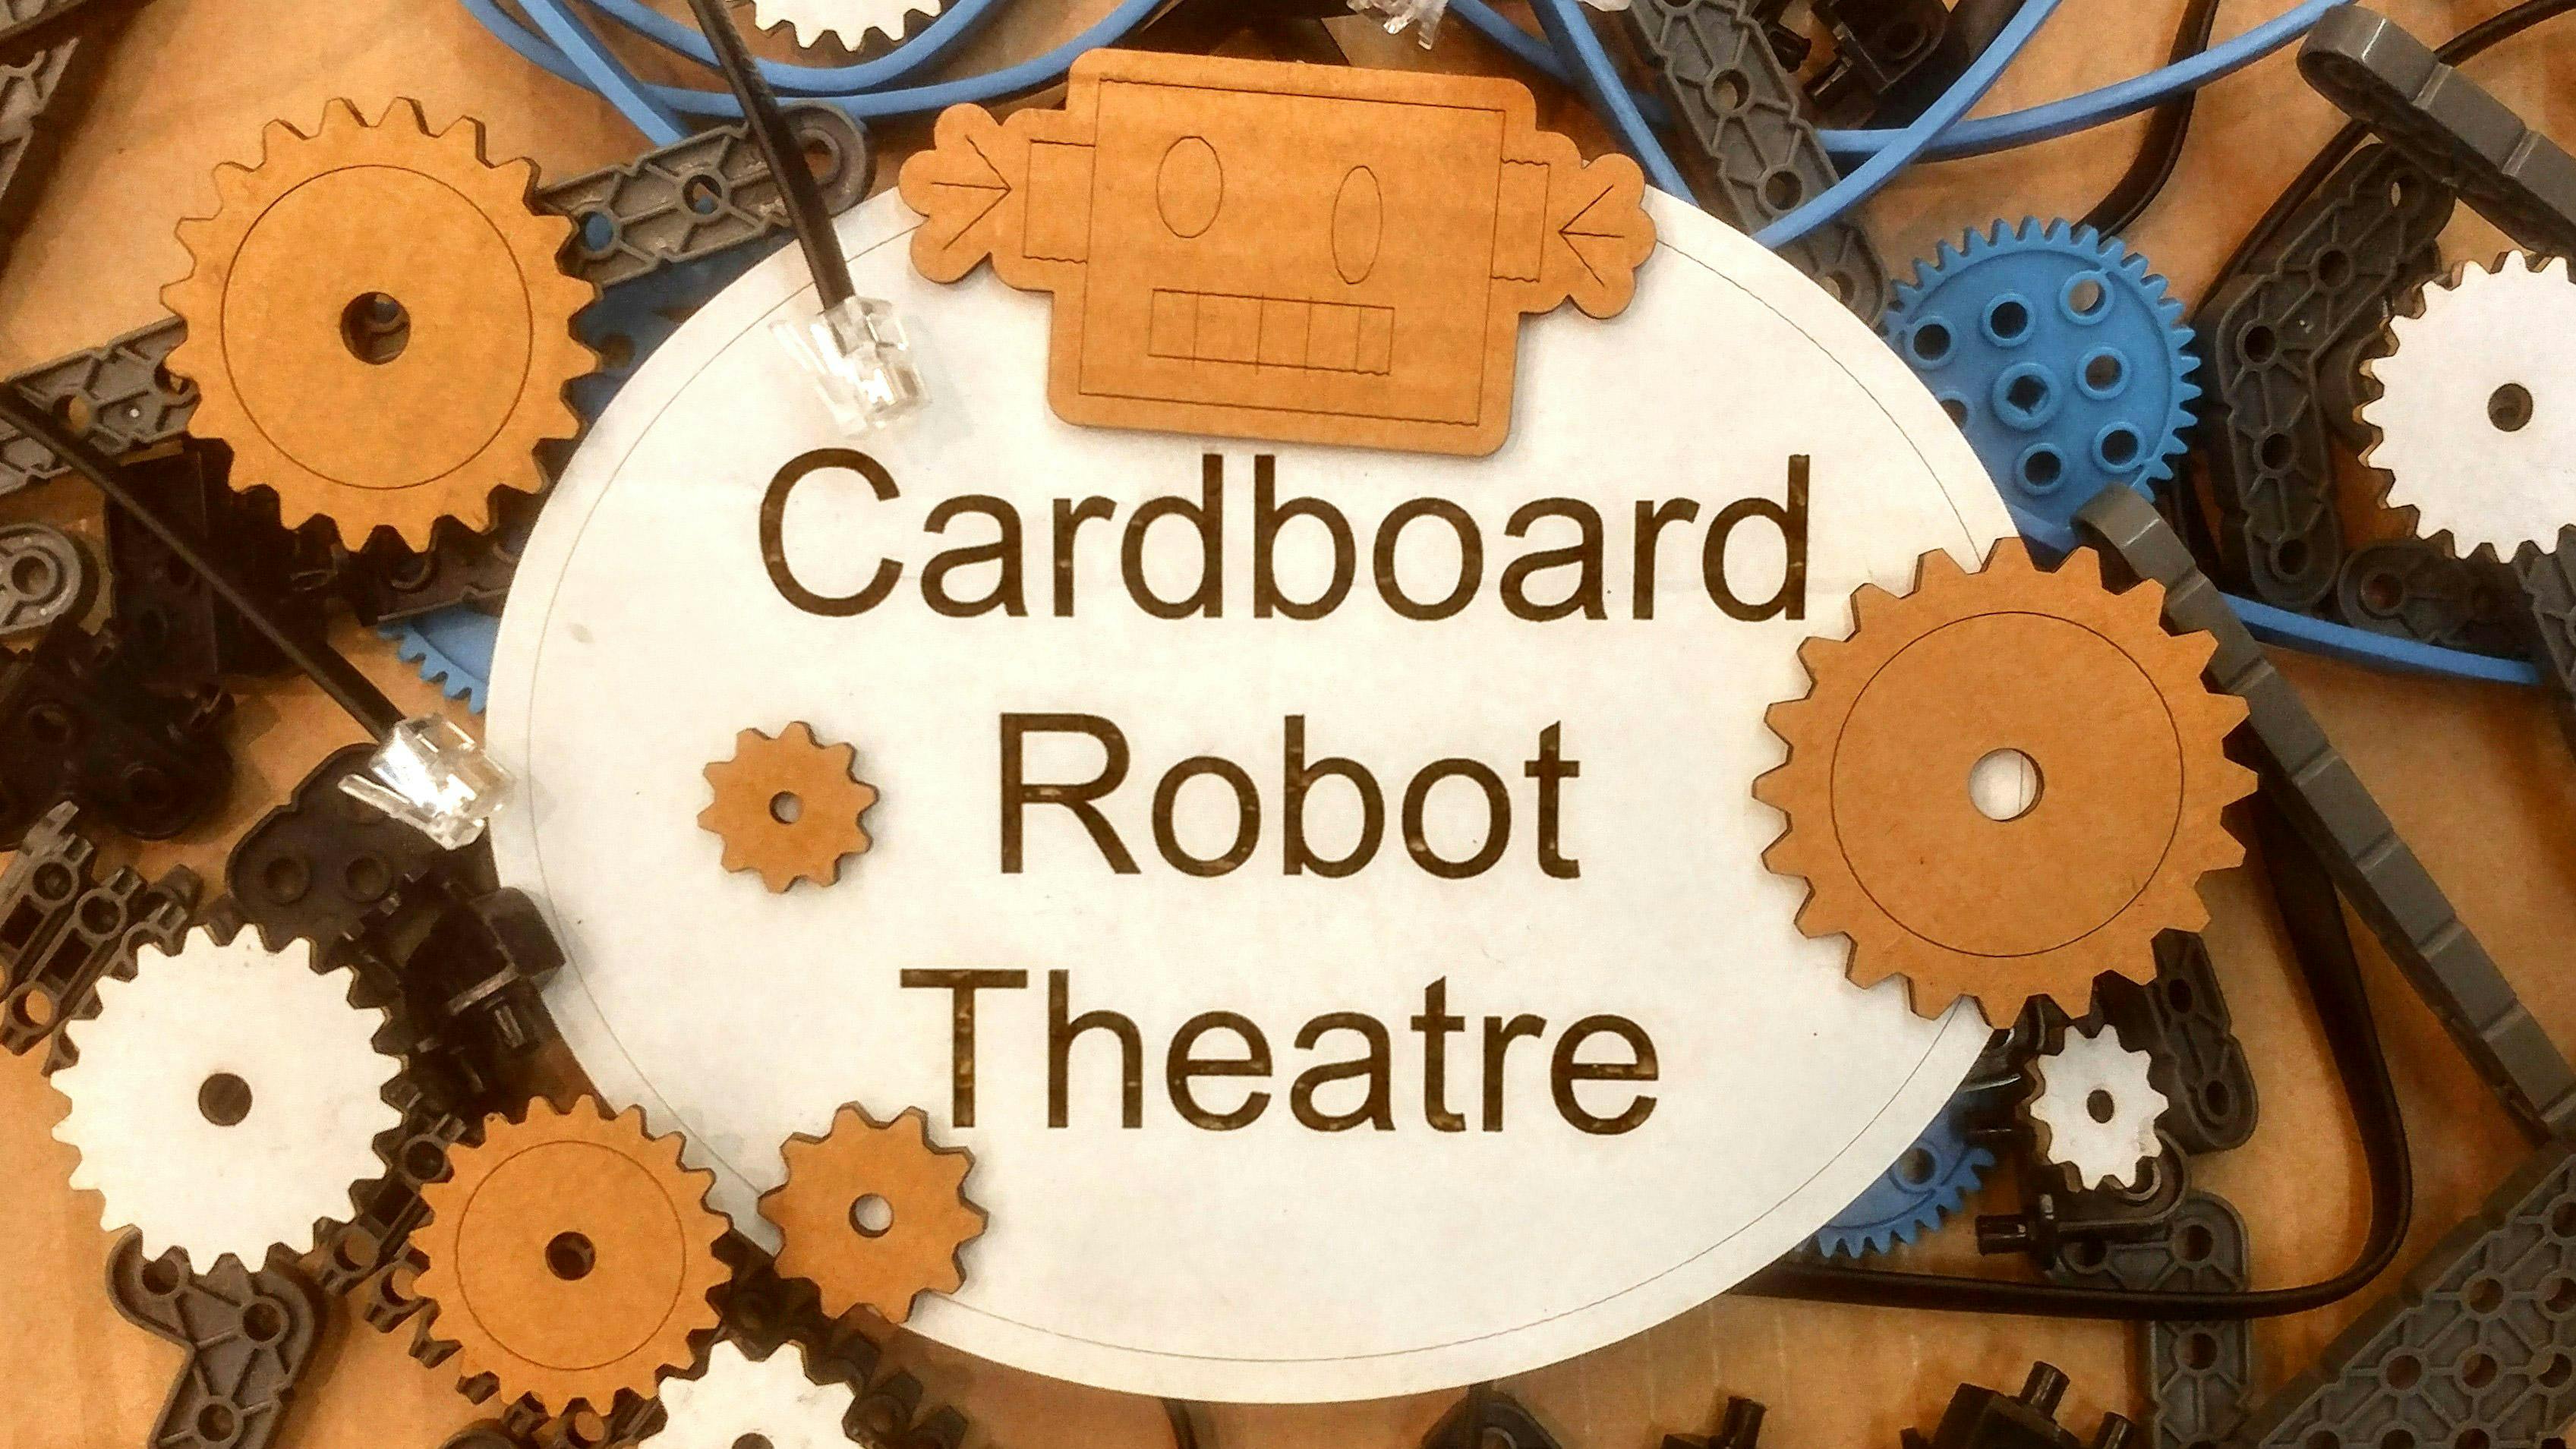 Cardboard Robot Theatre Workshop - all ages welcome! (Tuesday)